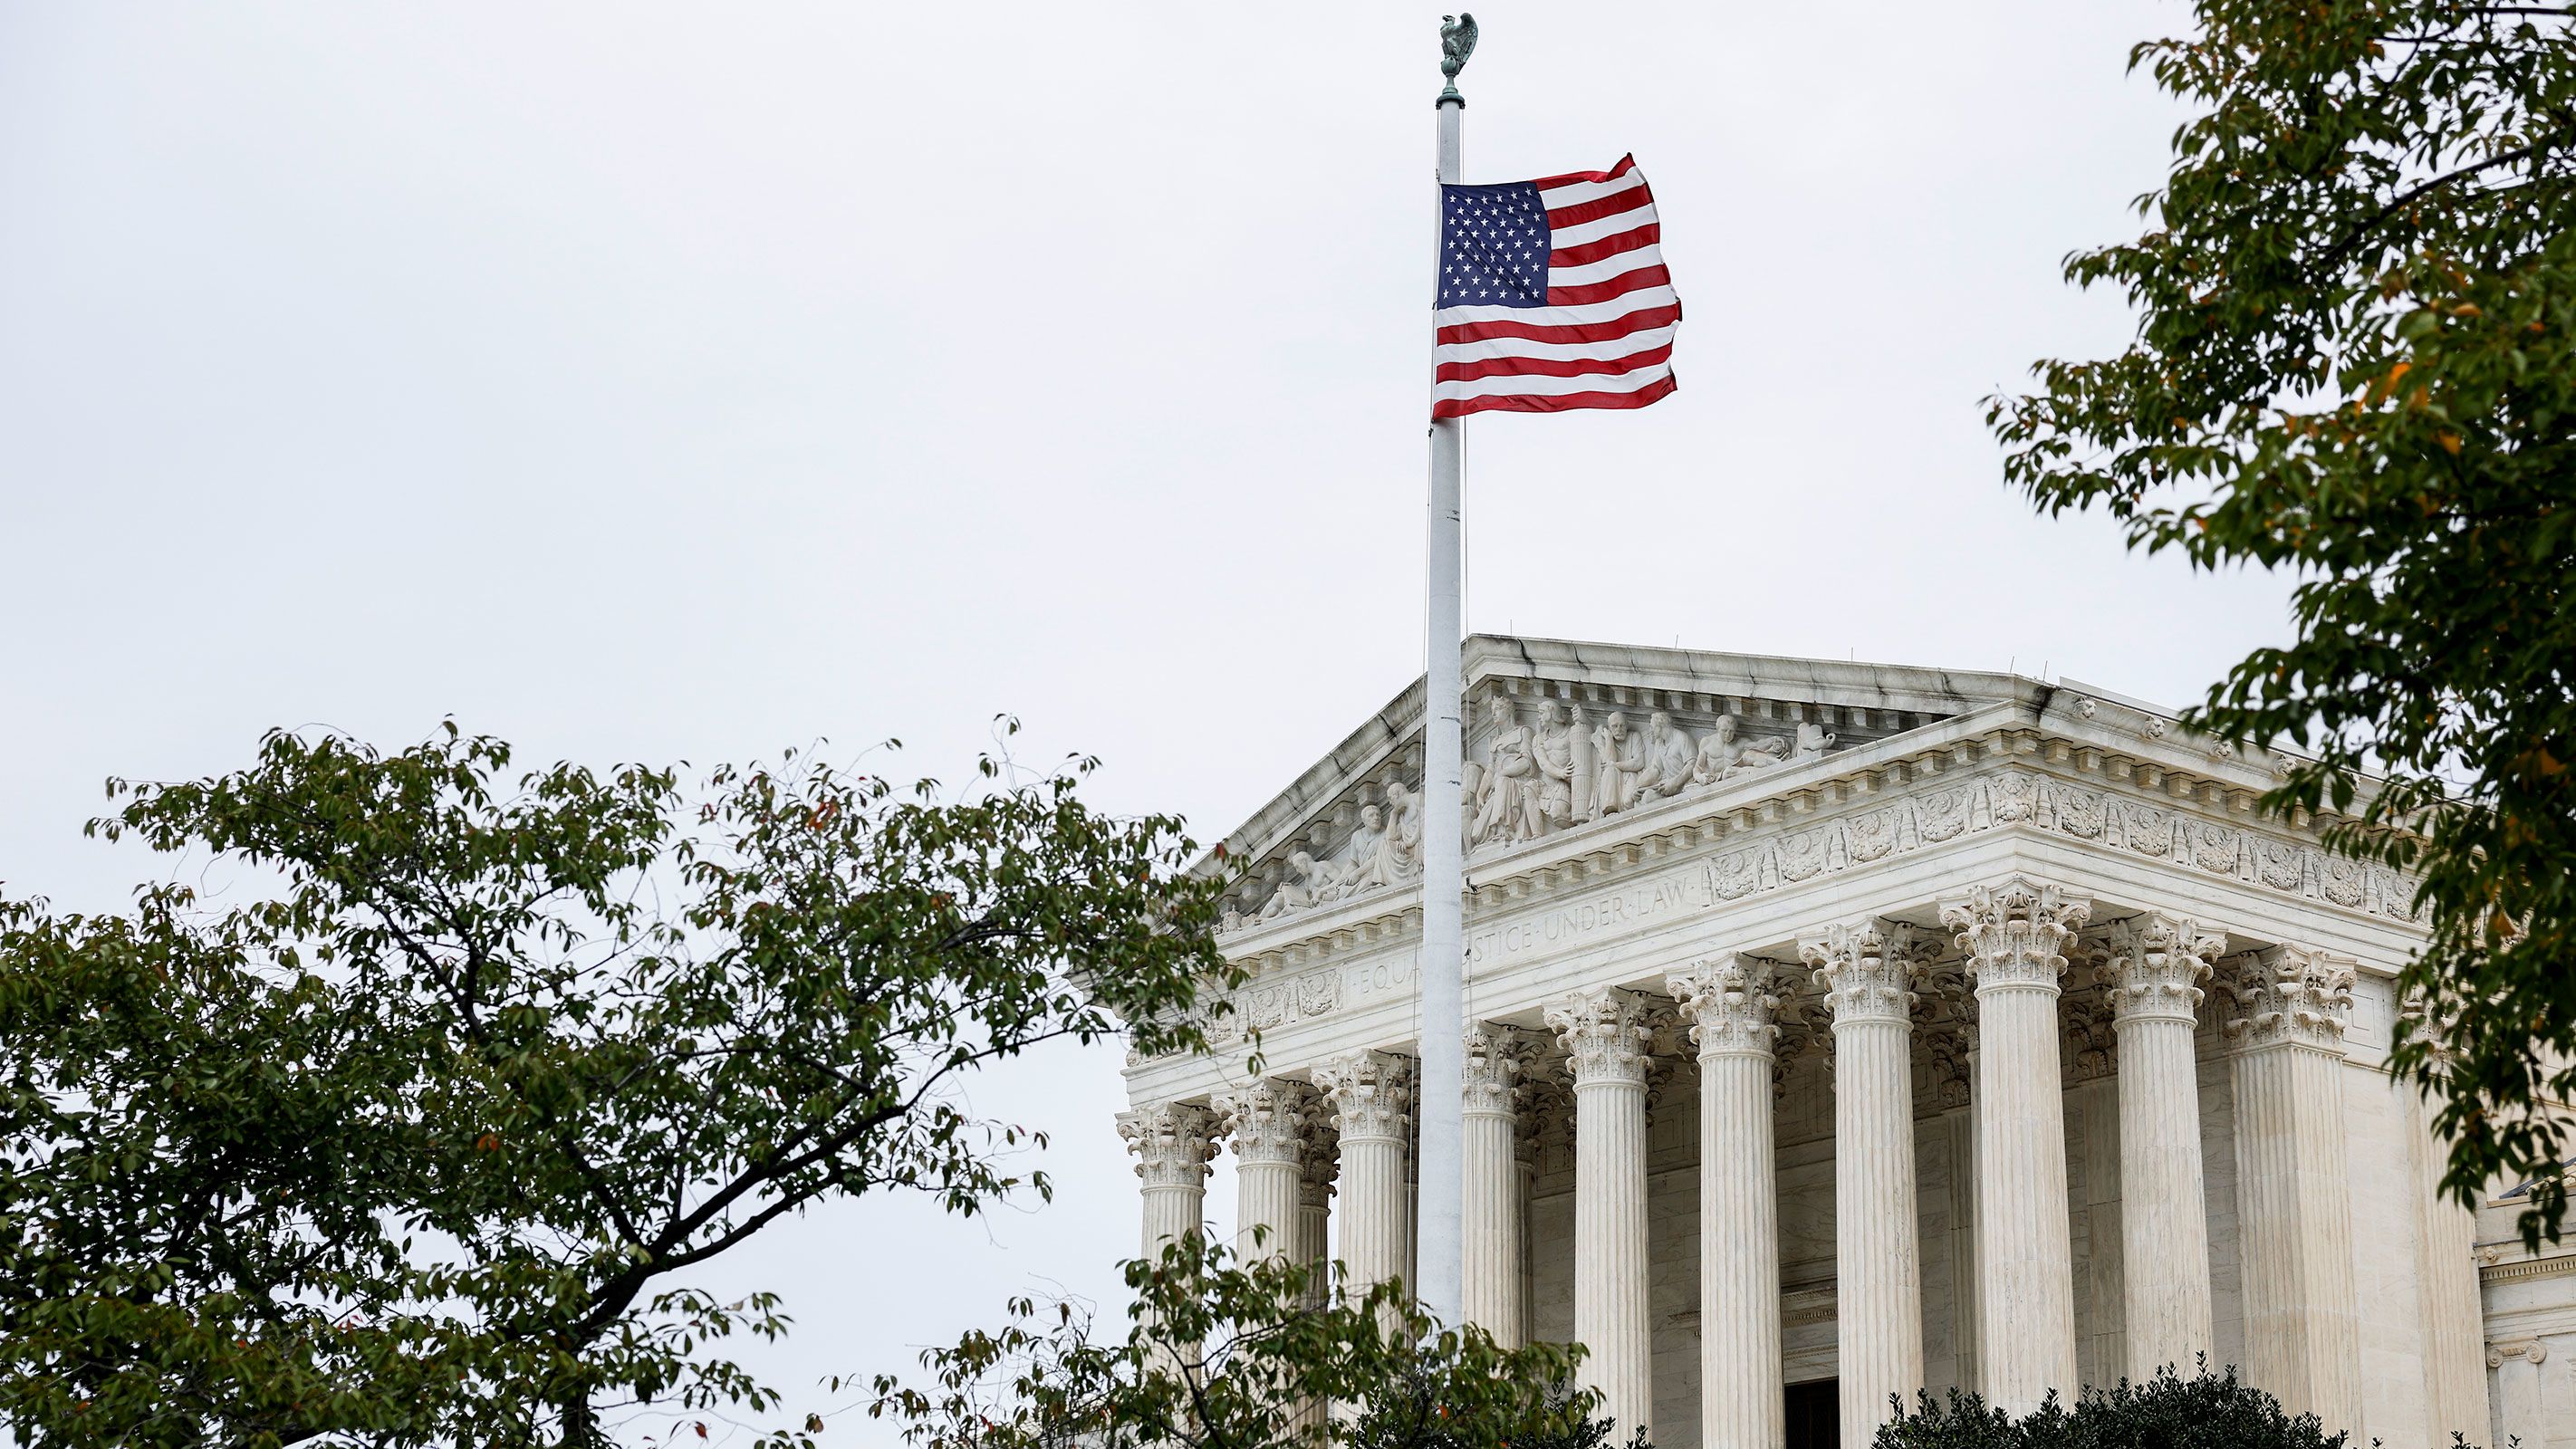 Consumer watchdog funding fight goes before justices - SCOTUSblog